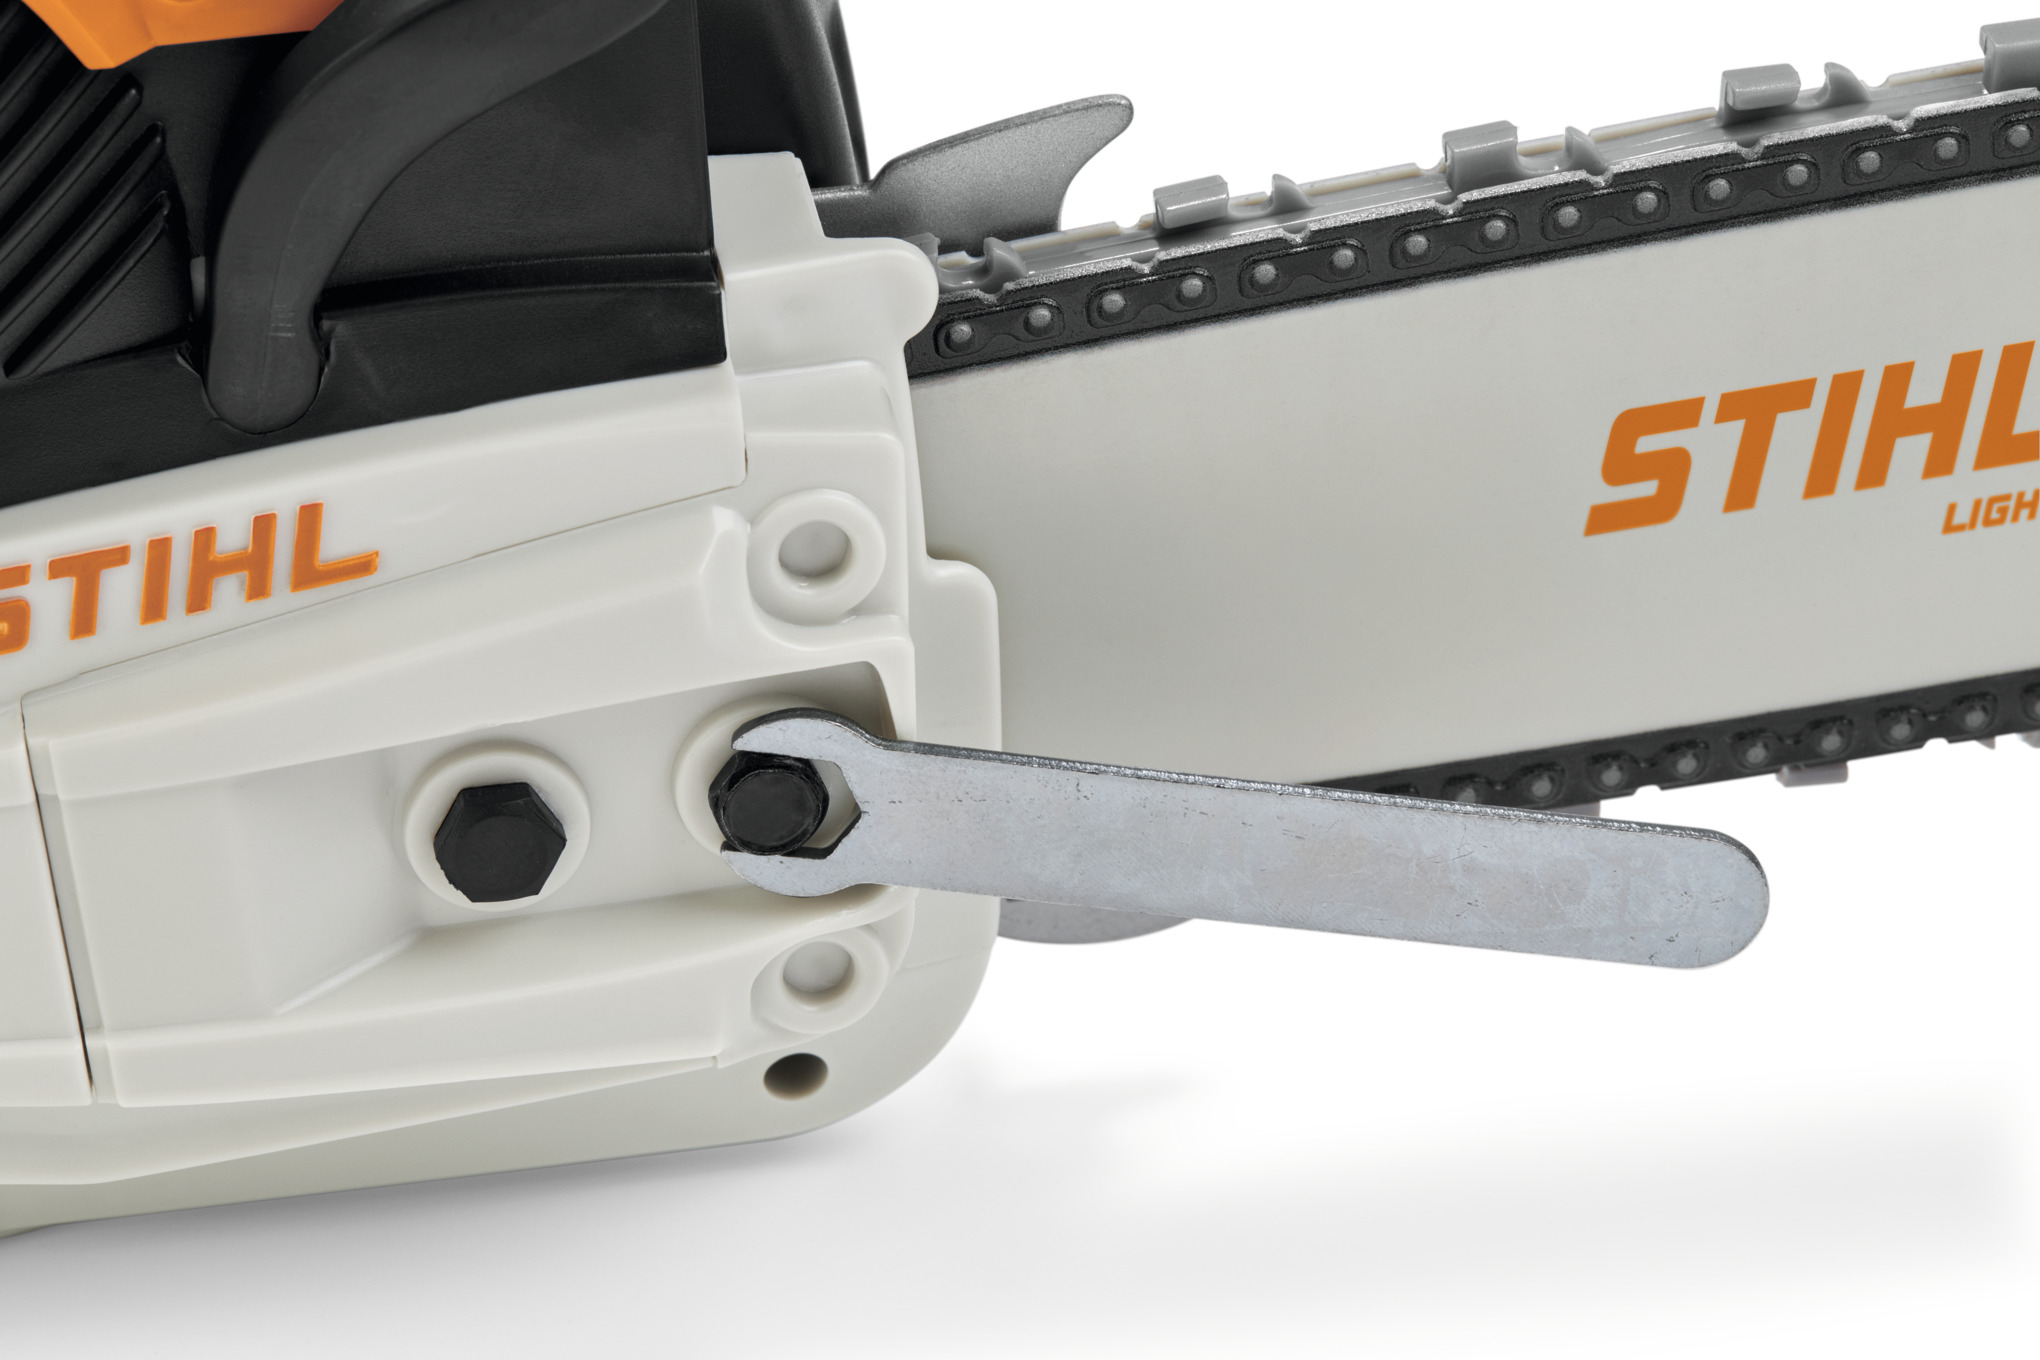 Children's battery-operated MS 500i toy chainsaw